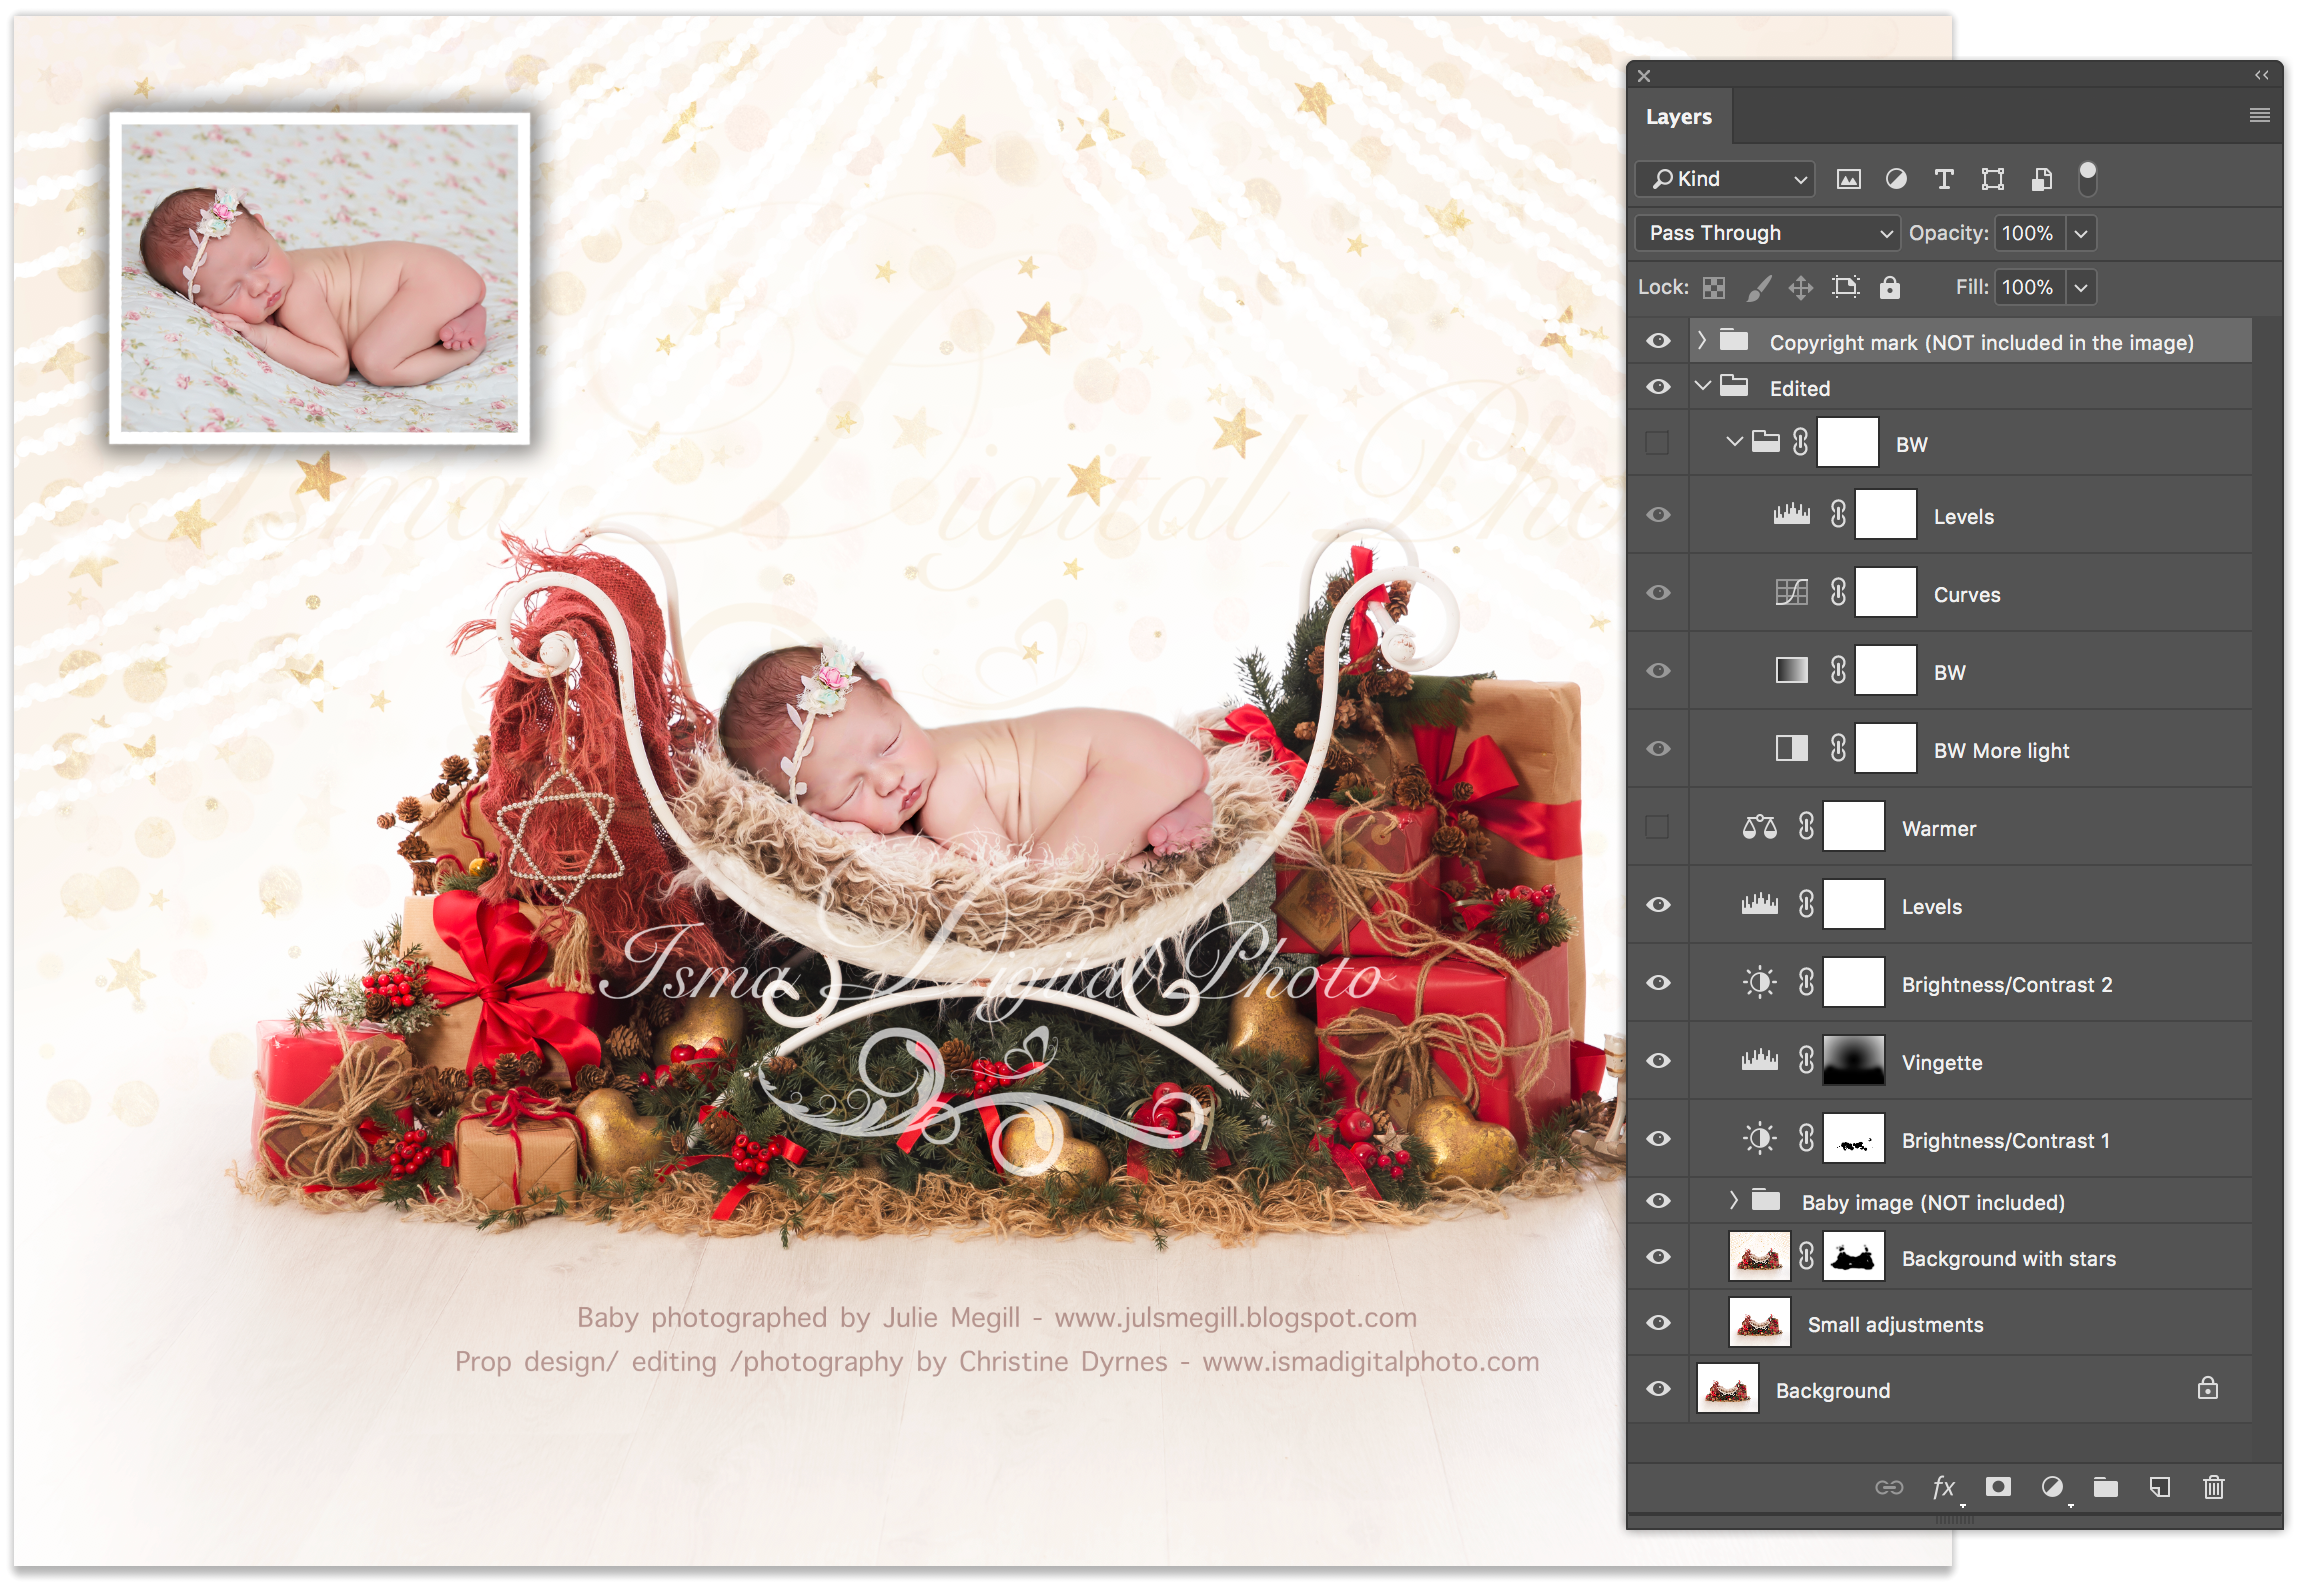 Digital Backdrop /Props for Newborn /baby photography - High resolution digital backdrop /background - one JPG and one PSD file with layers